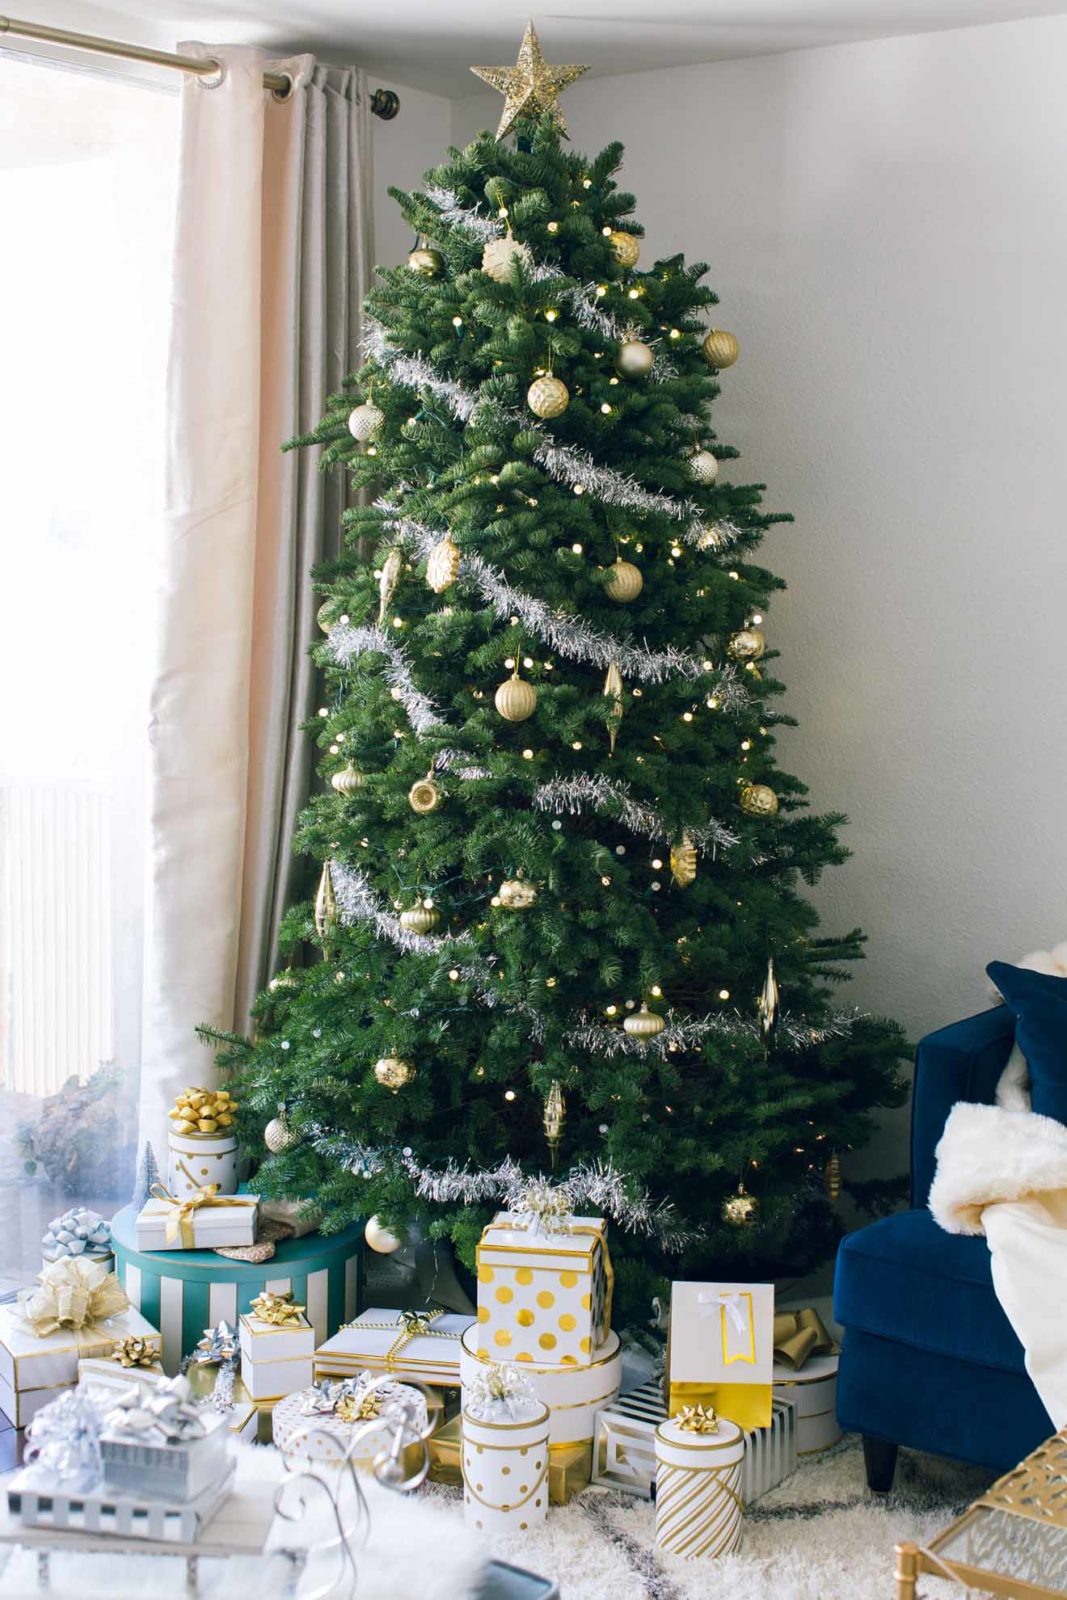 10 EASY HOLIDAY HOME DECOR IDEAS for christmas by Home Decor Blogger Laura Lily, silver and gold Christmas Tree decor,